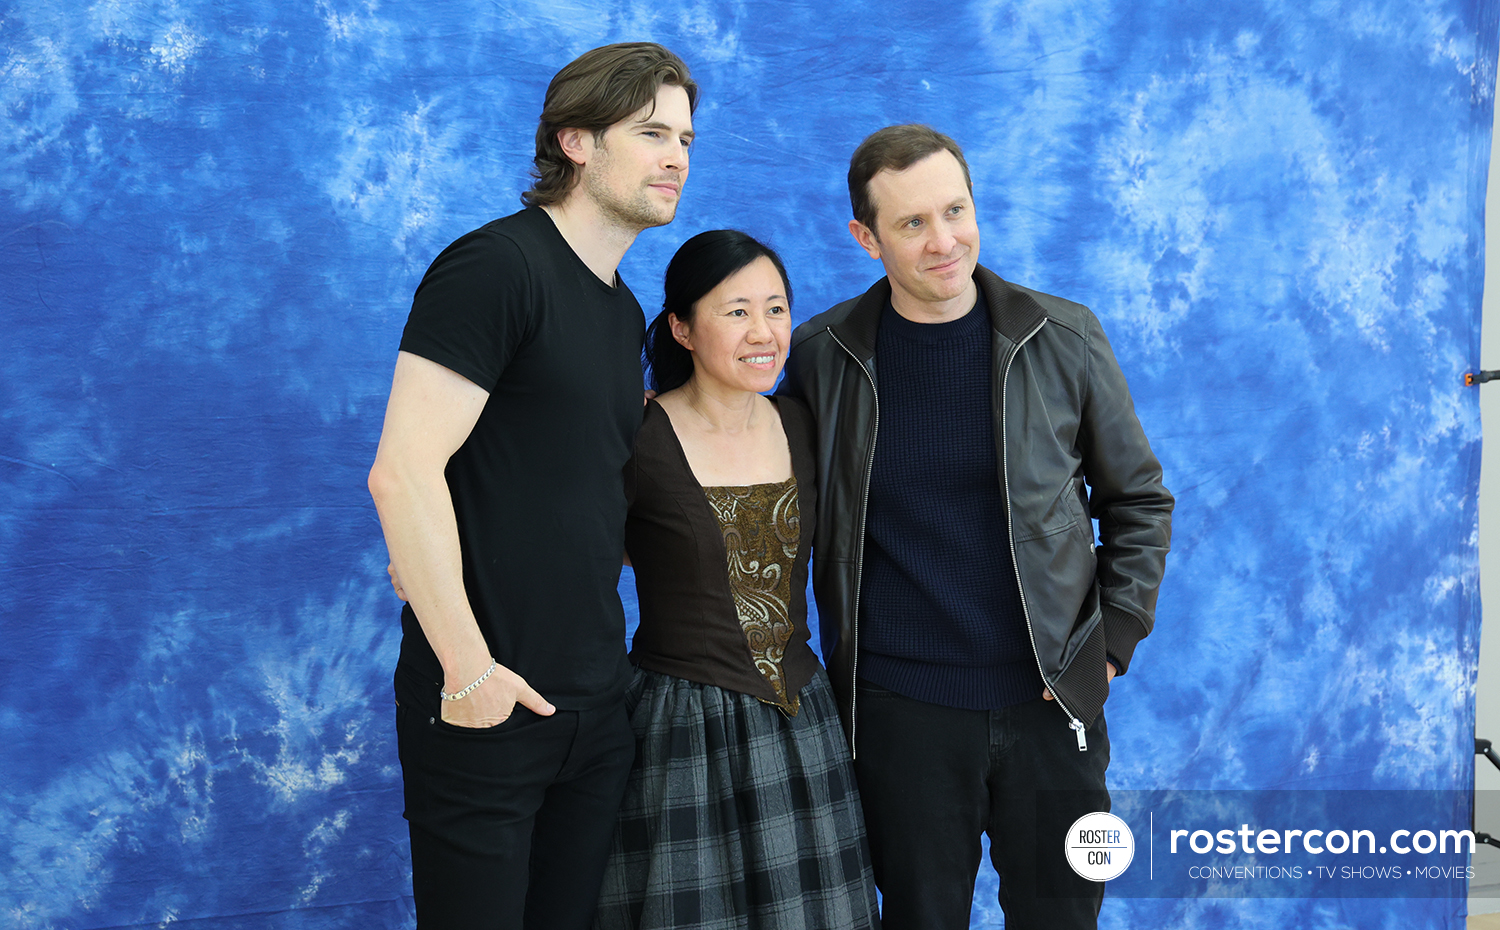 Photoshoot - David Berry & Tim Downie - The Land Con 4 - Outlander